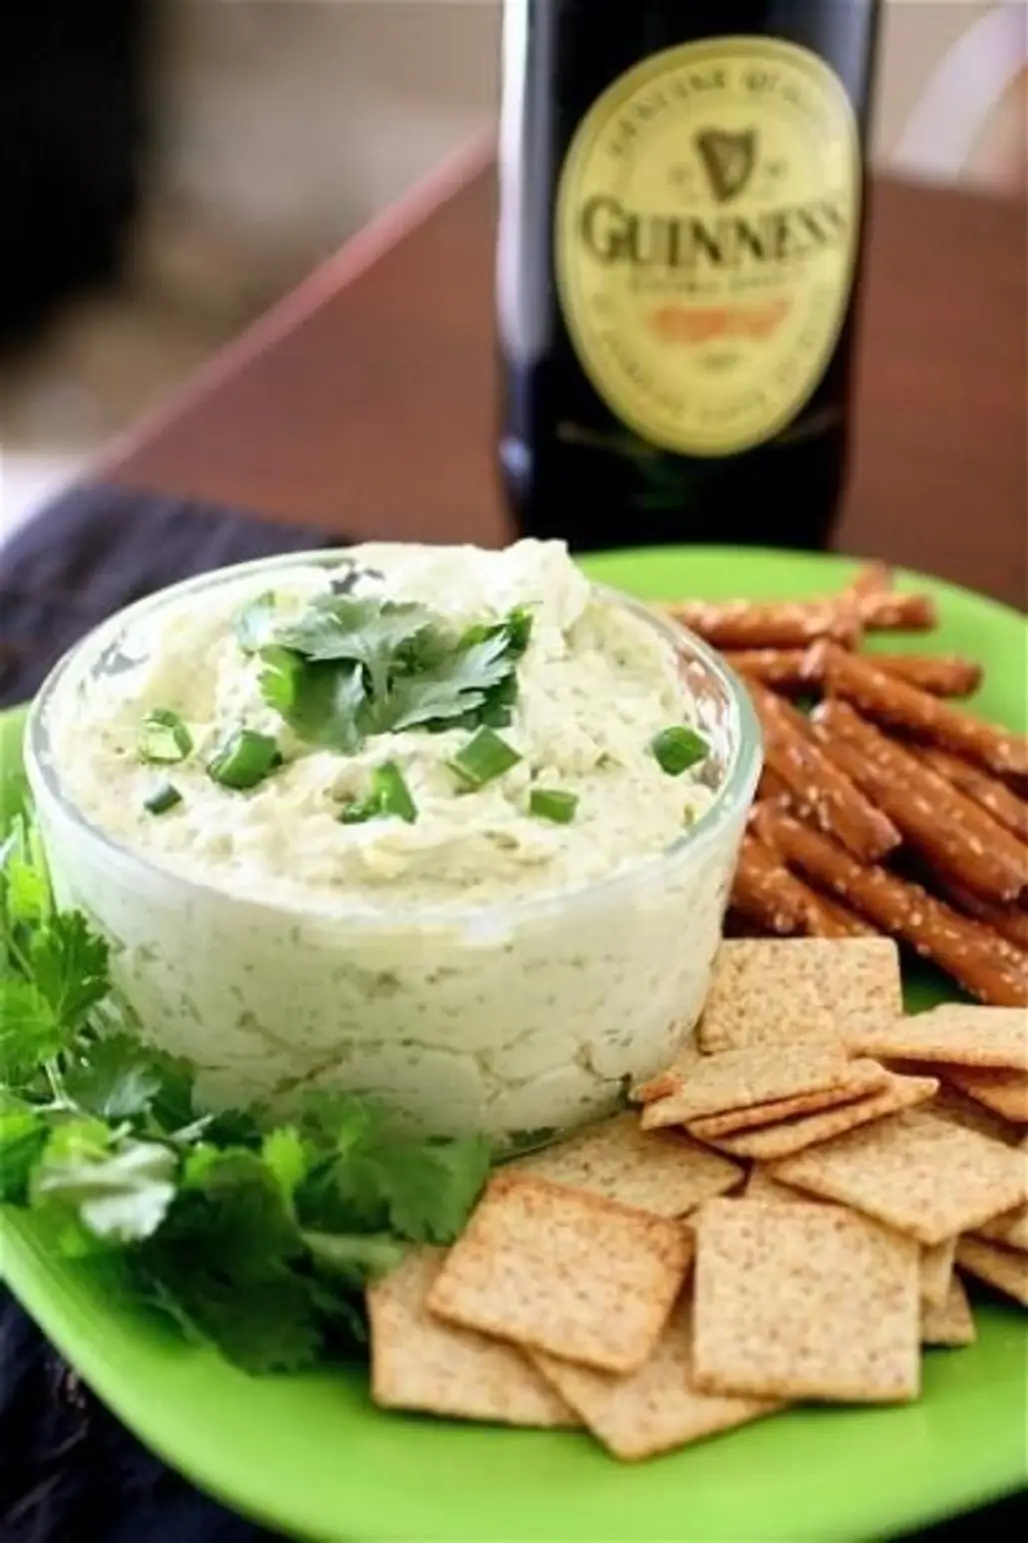 Guinness and Cheddar Dip